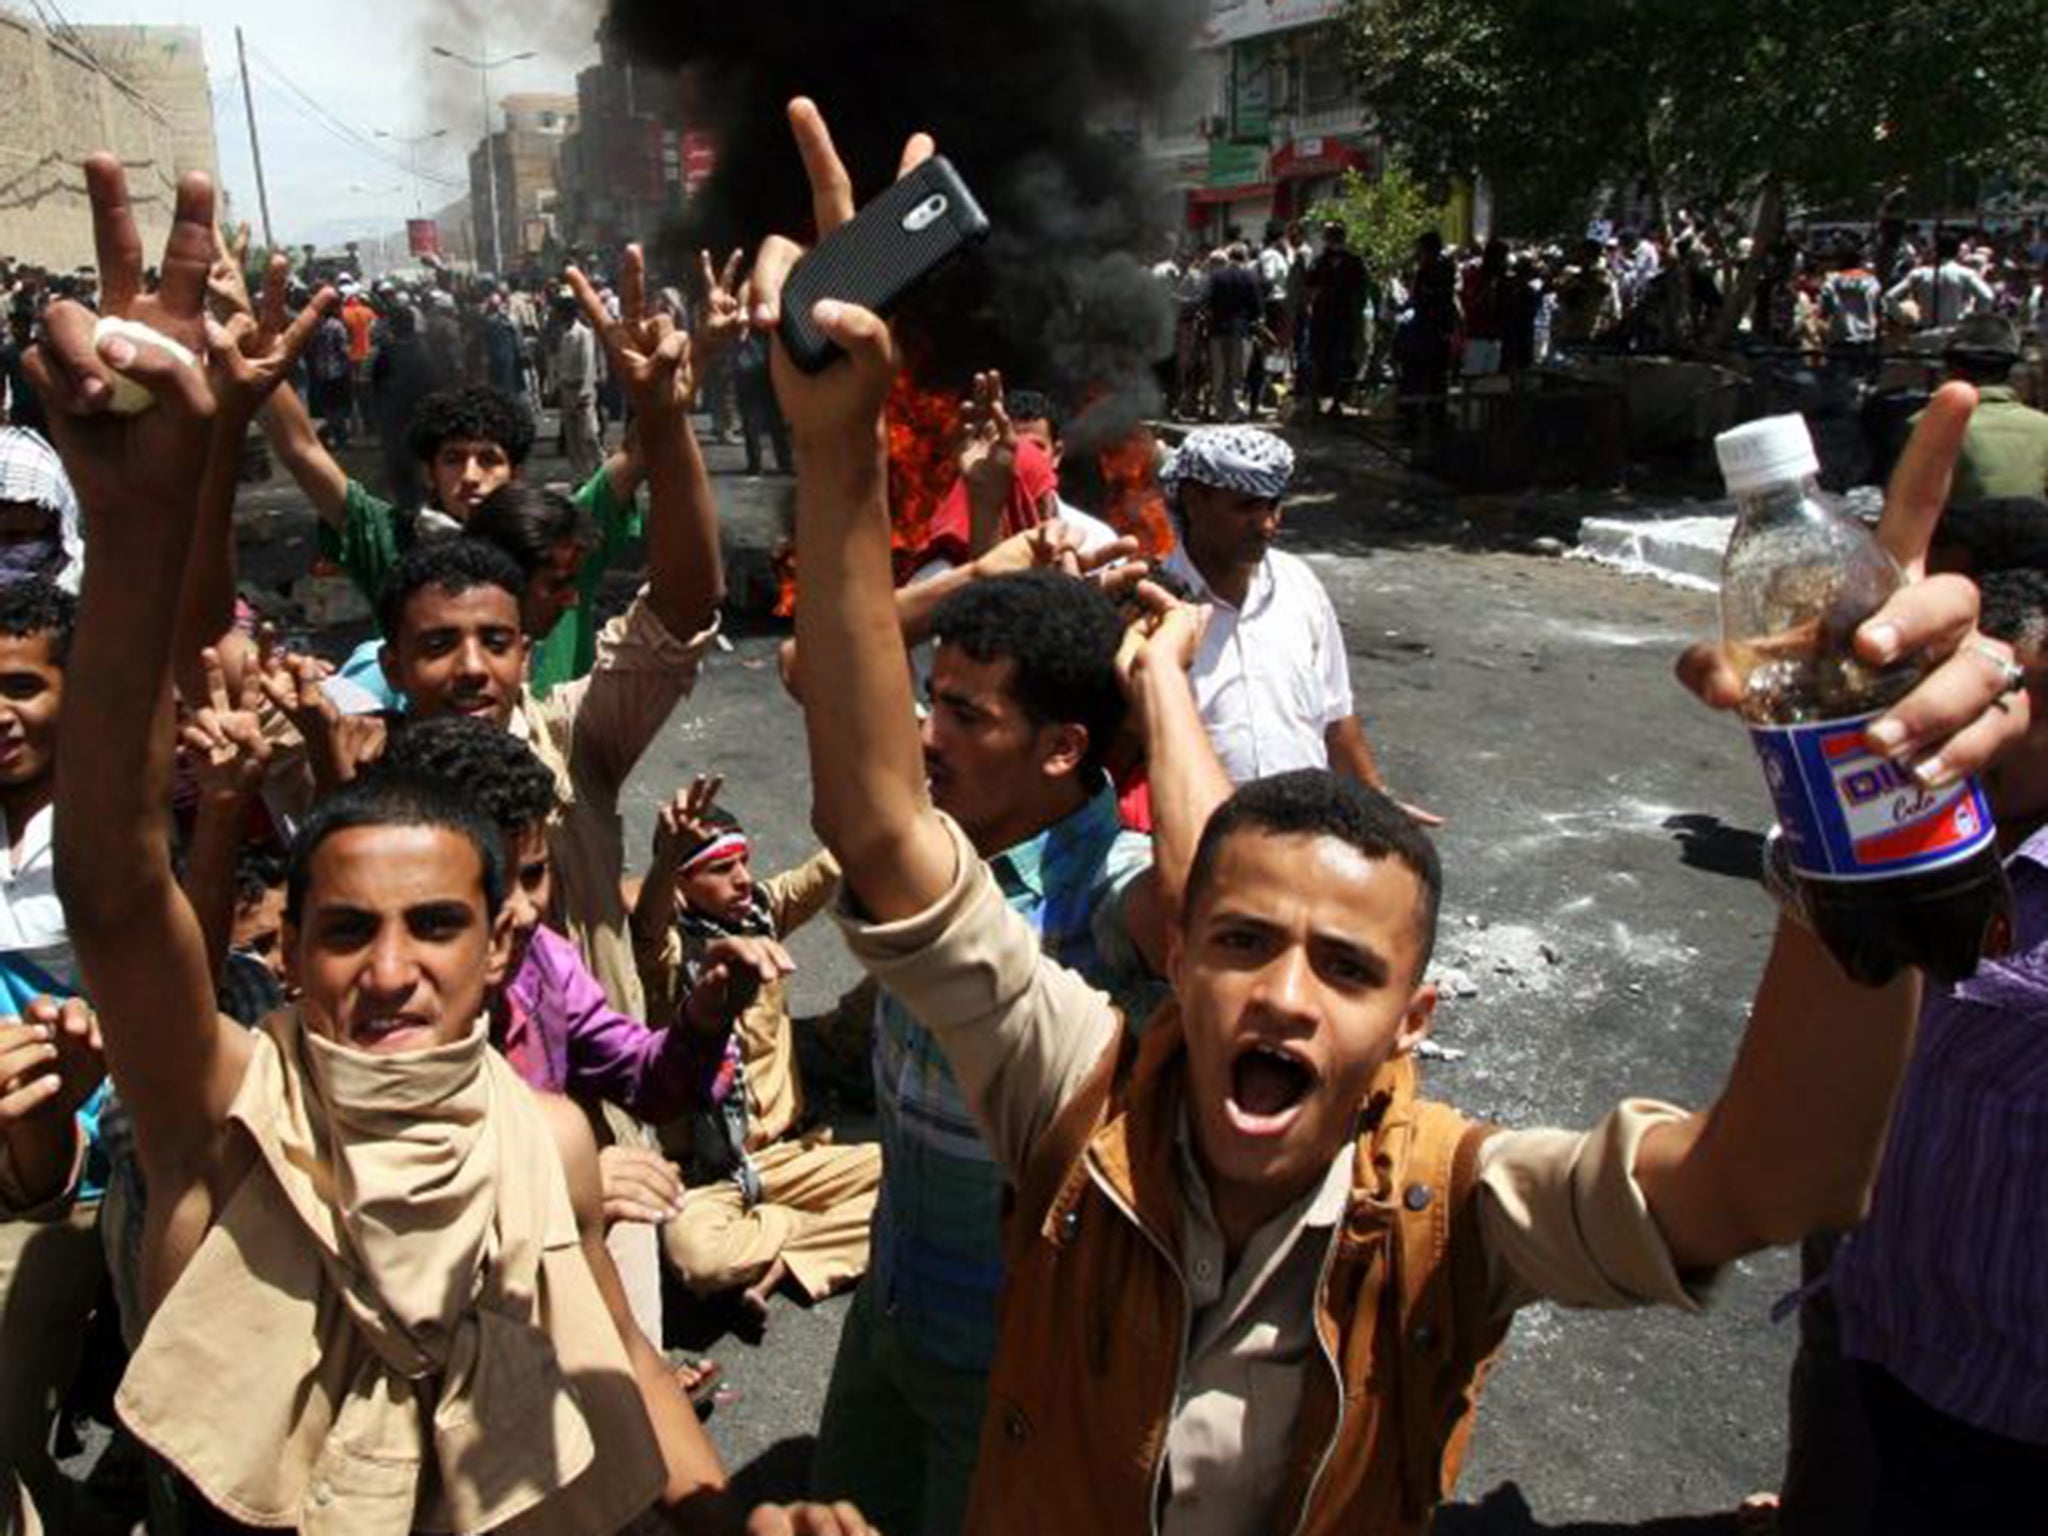 Crowds in Taiz, Yemen react to a Houthi rebel takeover in parts of the city